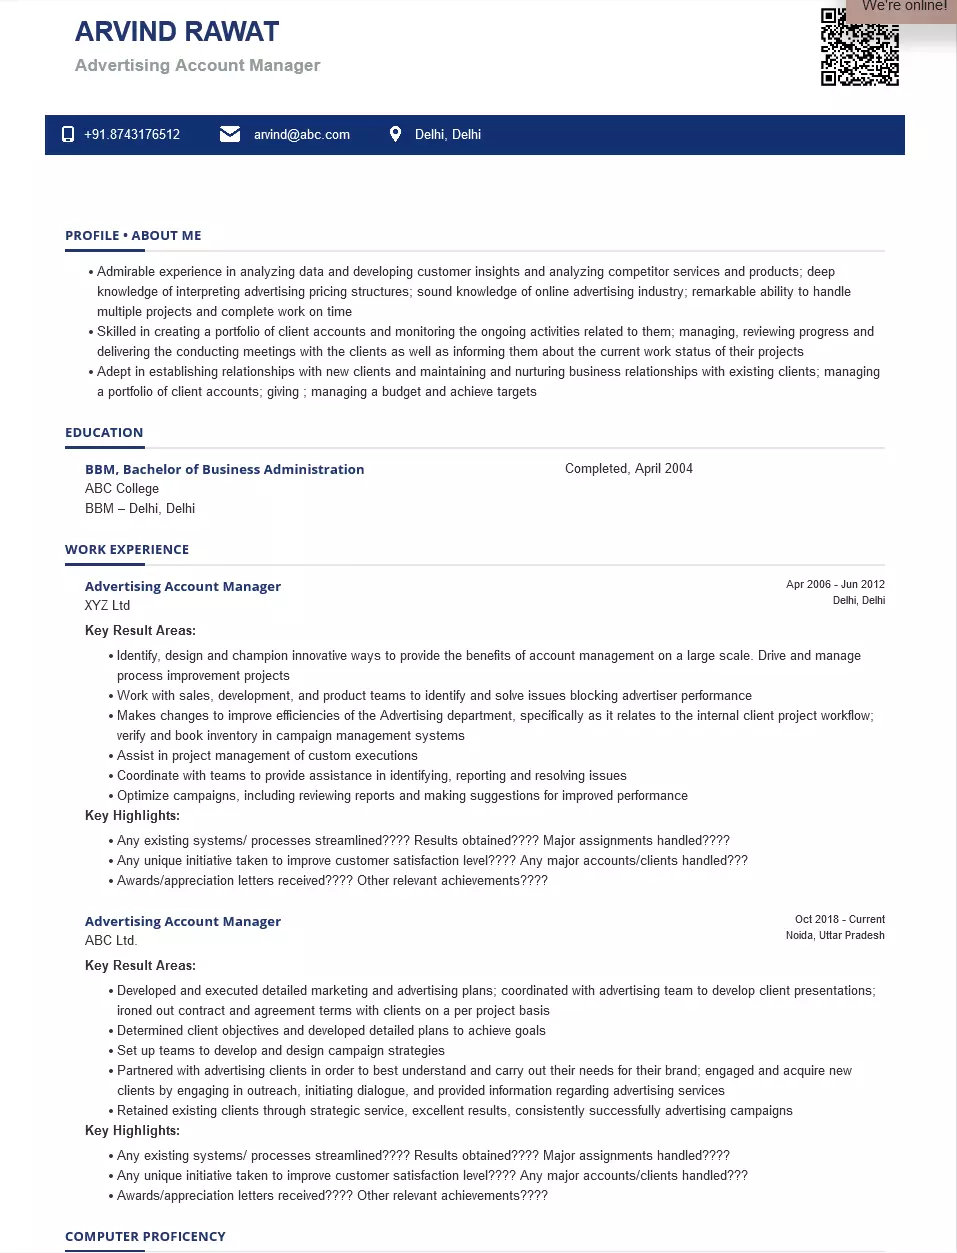 (advertising) account manager resume samples